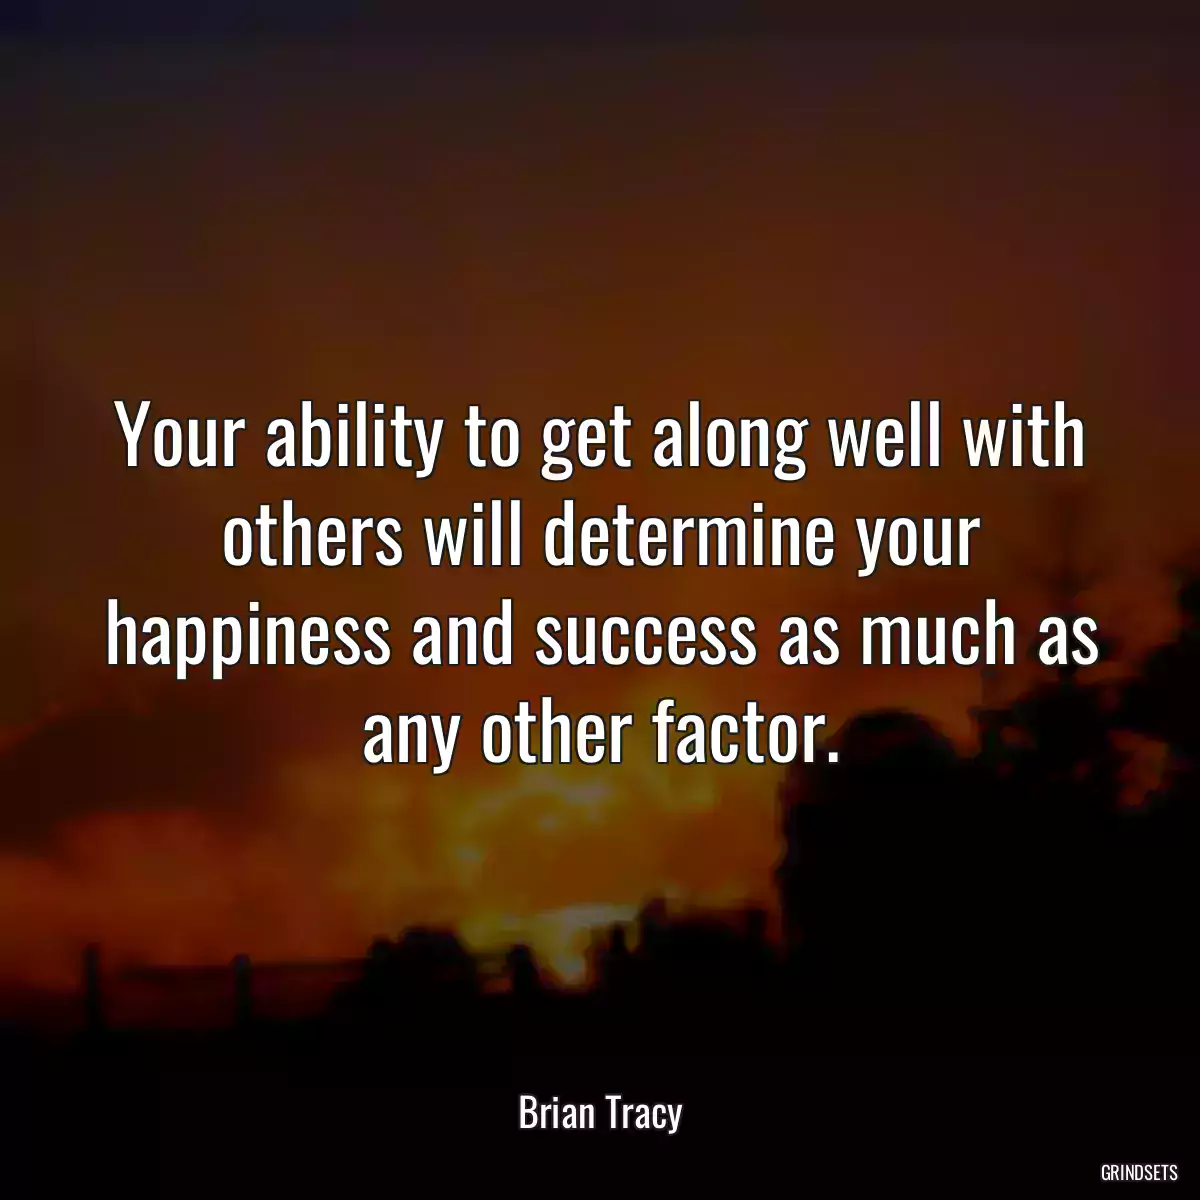 Your ability to get along well with others will determine your happiness and success as much as any other factor.